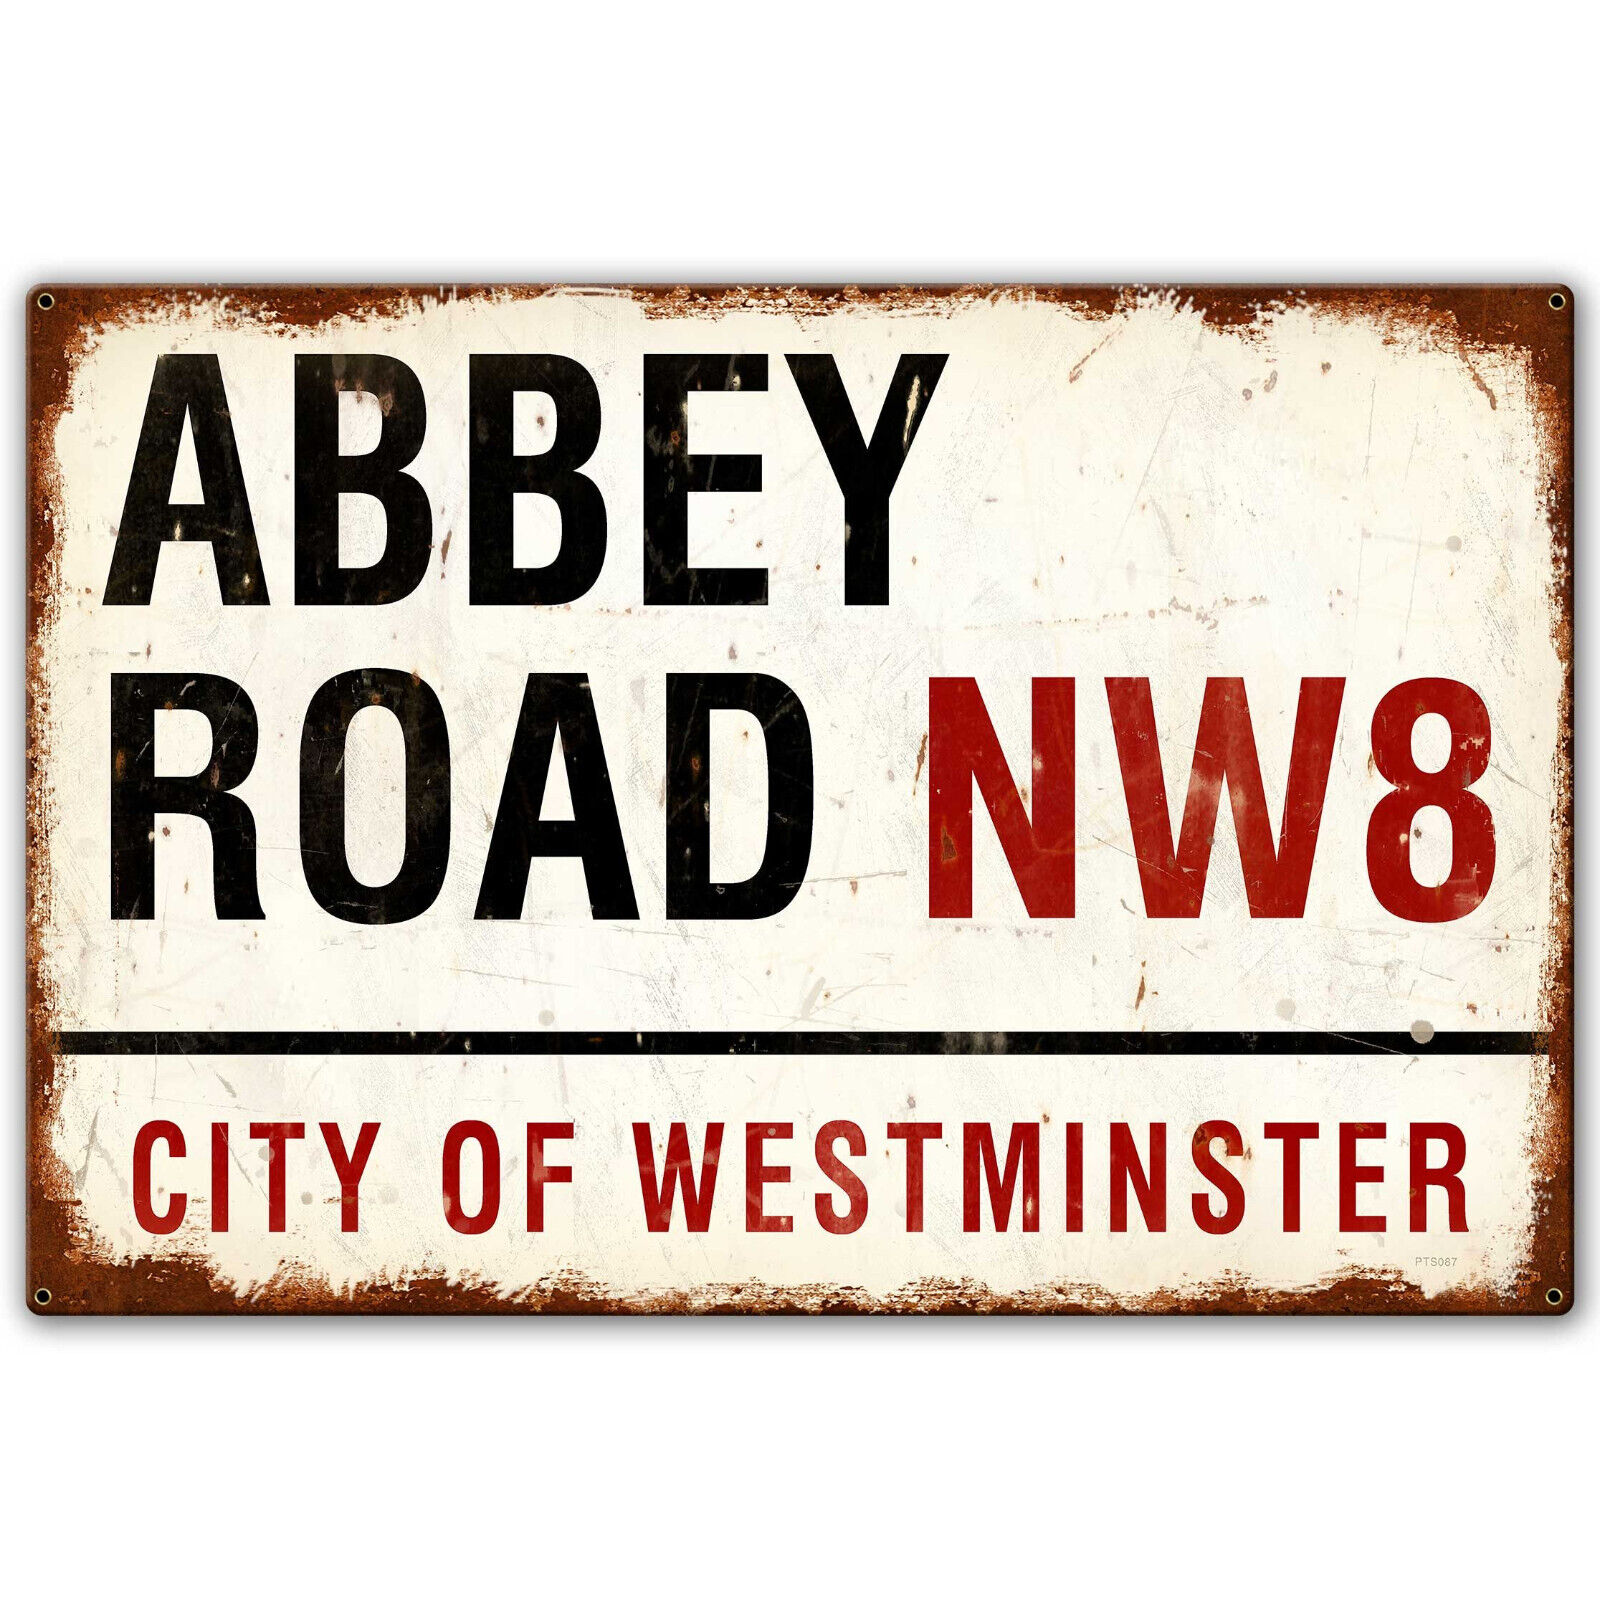 ABBEY ROAD NW8 CITY WESTMINSTER 30\